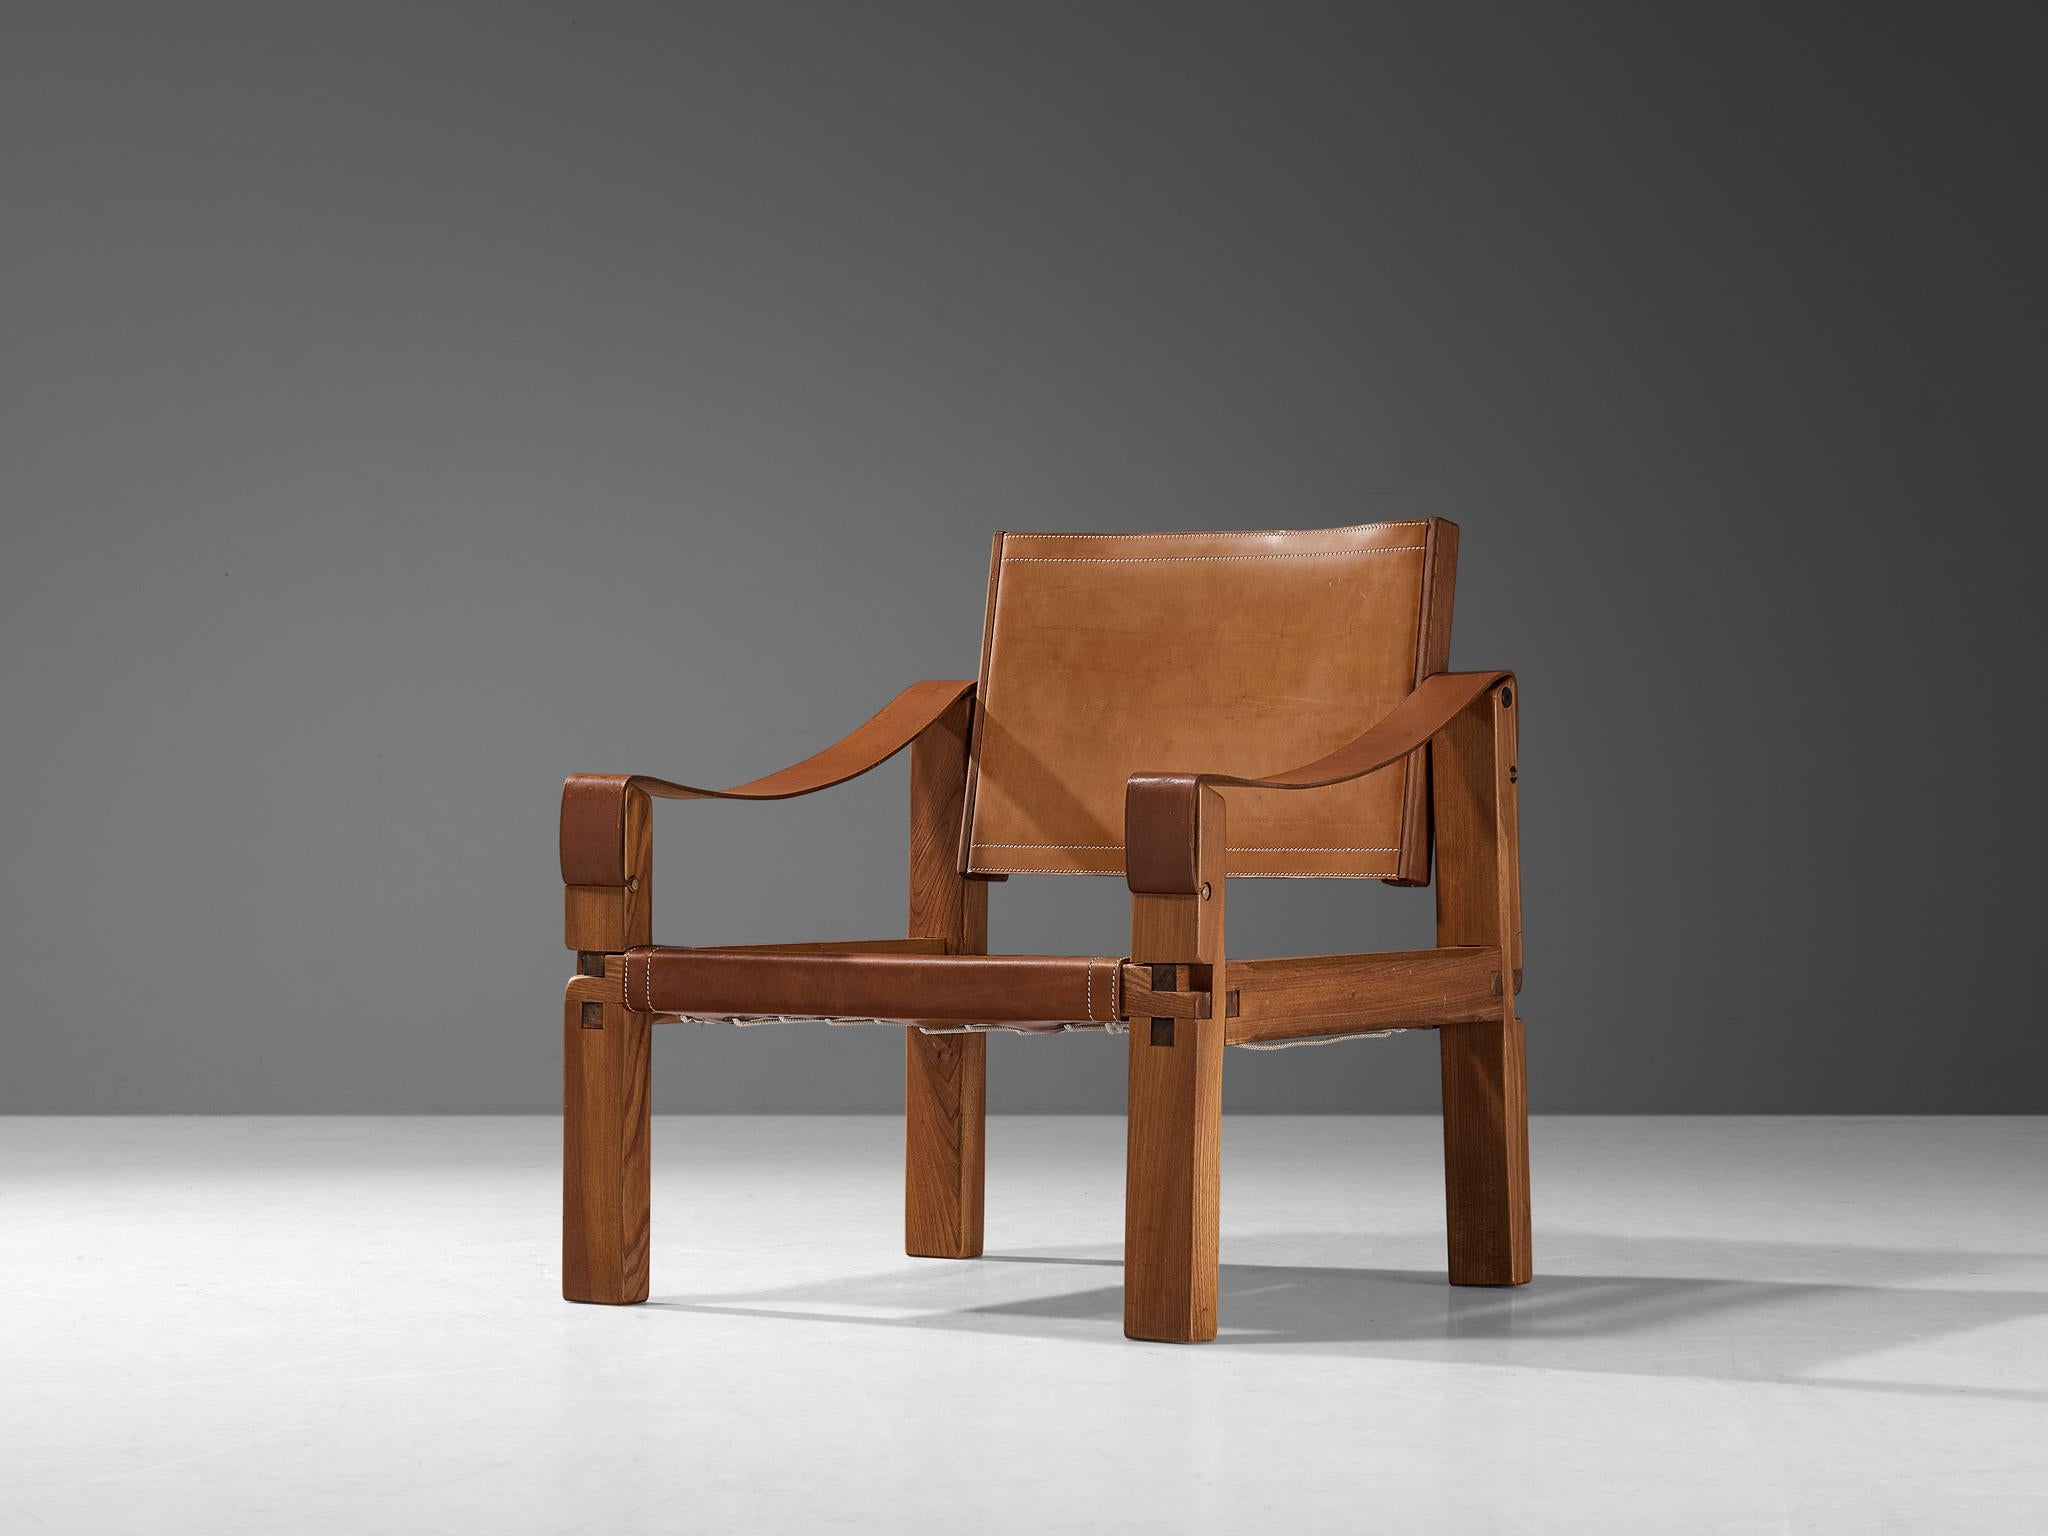 Pierre Chapo, armchair model 'S10X', elm, leather, France, circa 1964.

This design is an early edition, created according to the original craft methodology of Pierre Chapo. This comfortable armchair in solid elmwood and cognac saddle leather